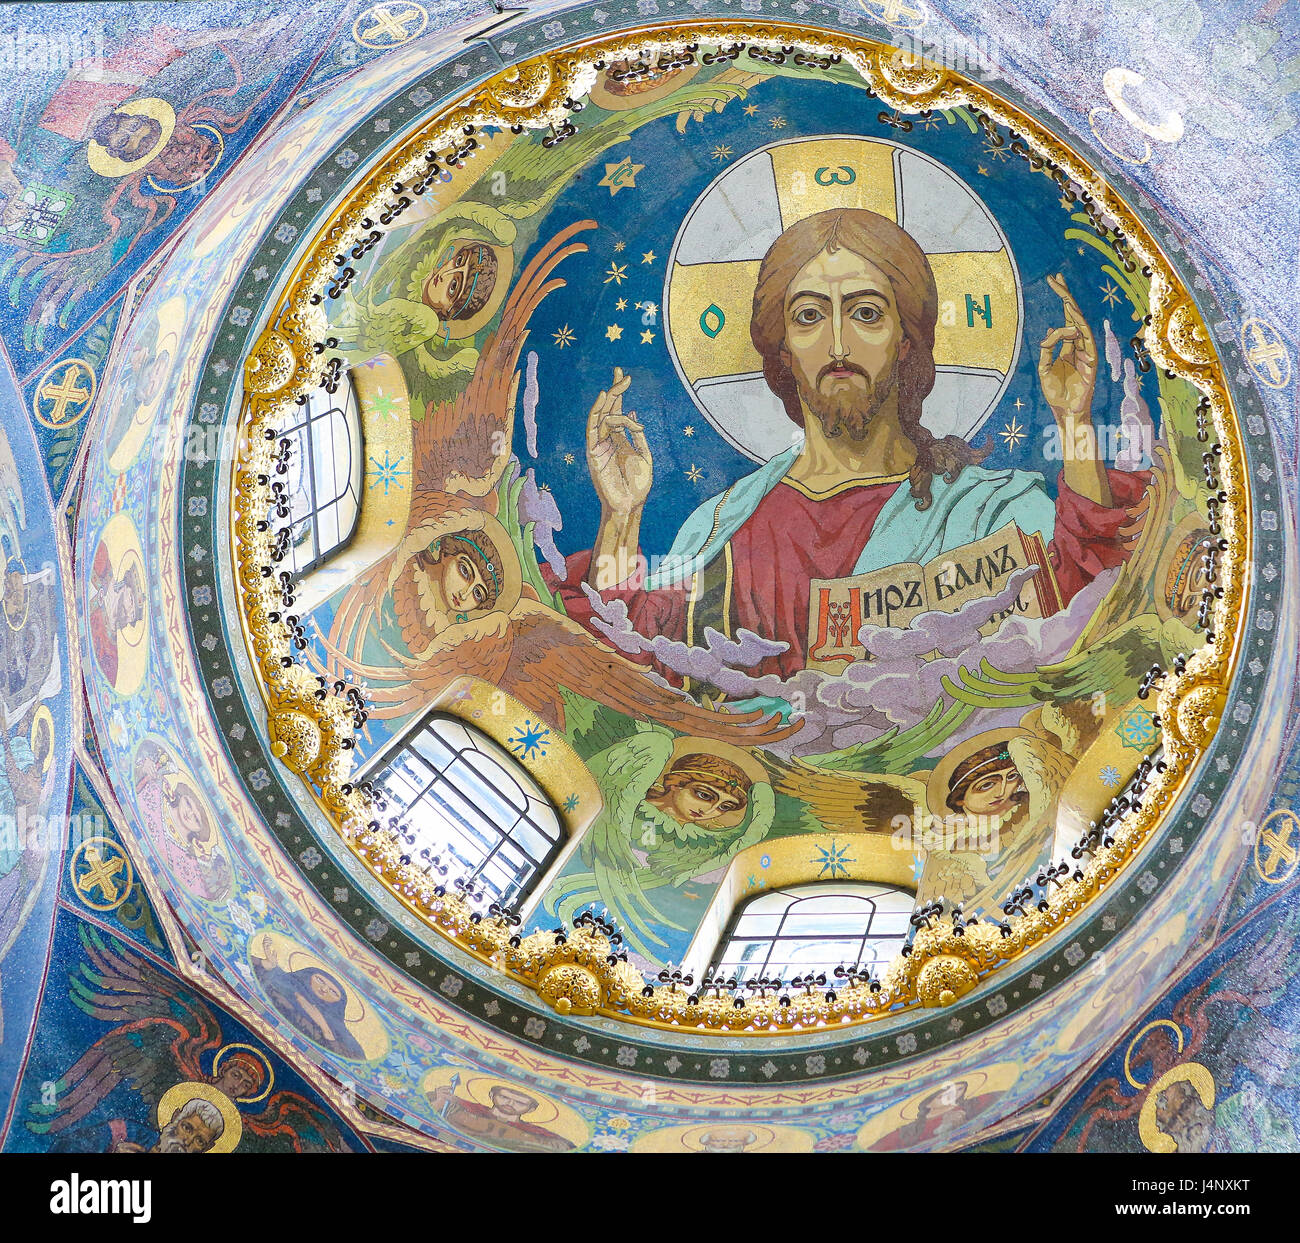 Mosaic in the Church of the Savior on Spilled Blood in St. Petersburg, Russia, depicting Jesus Christ Pantocrator Stock Photo